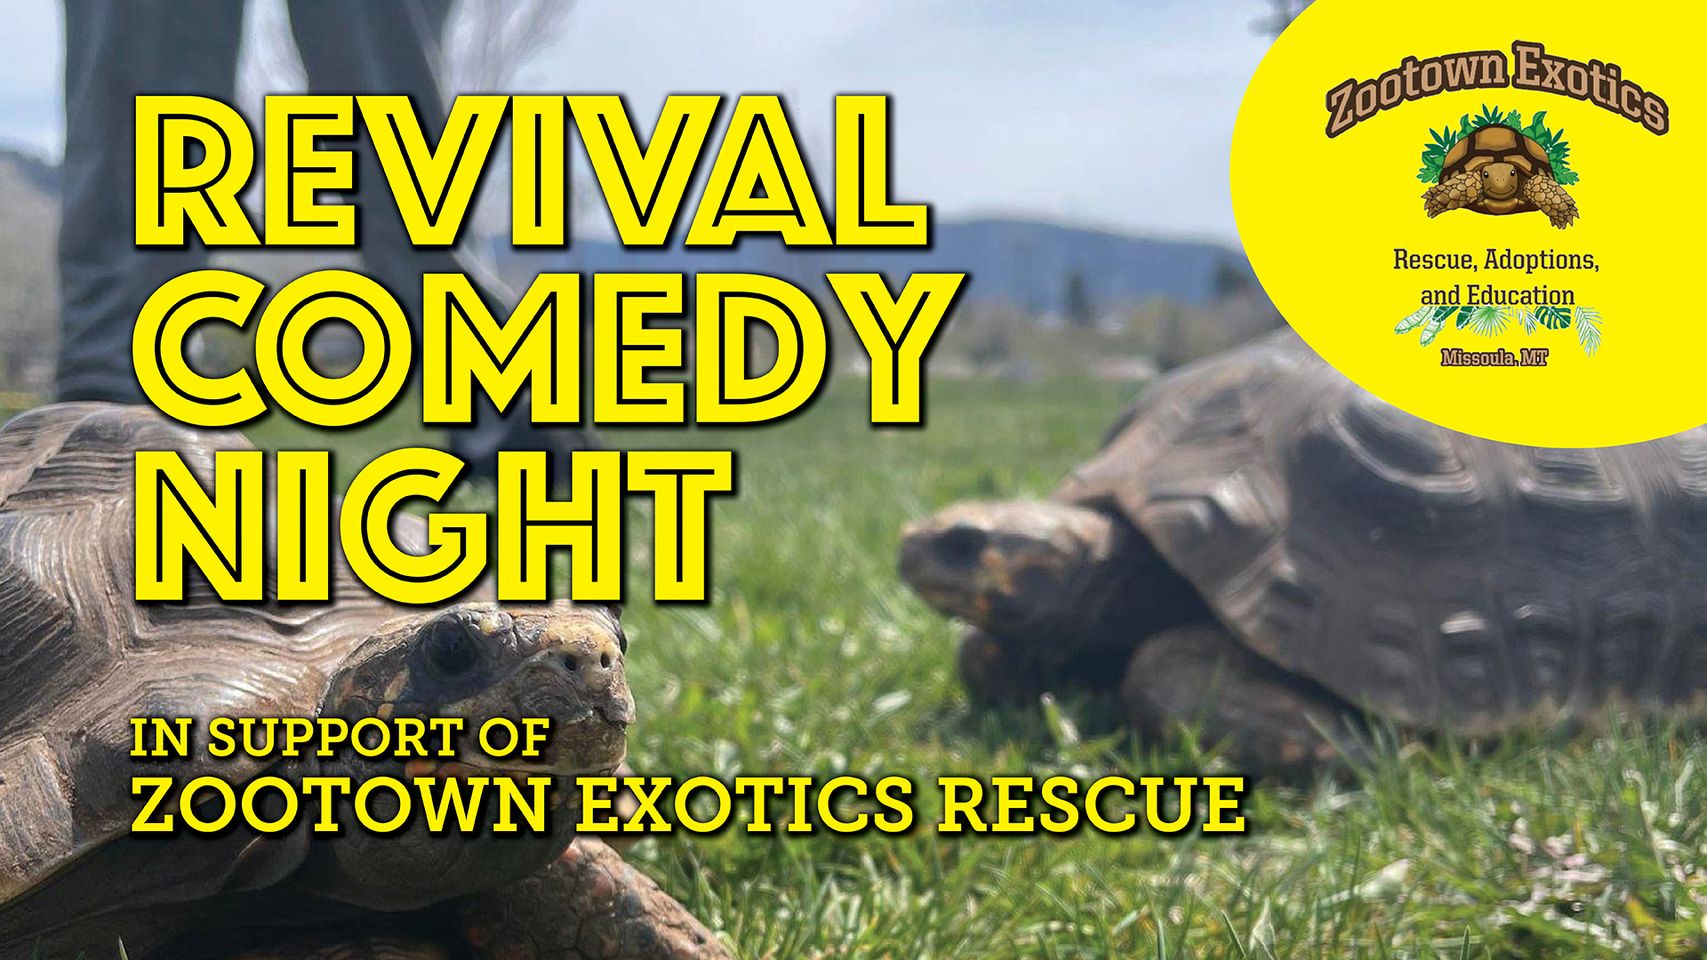 Revival Comedy Night for Zootown Exotics Rescue